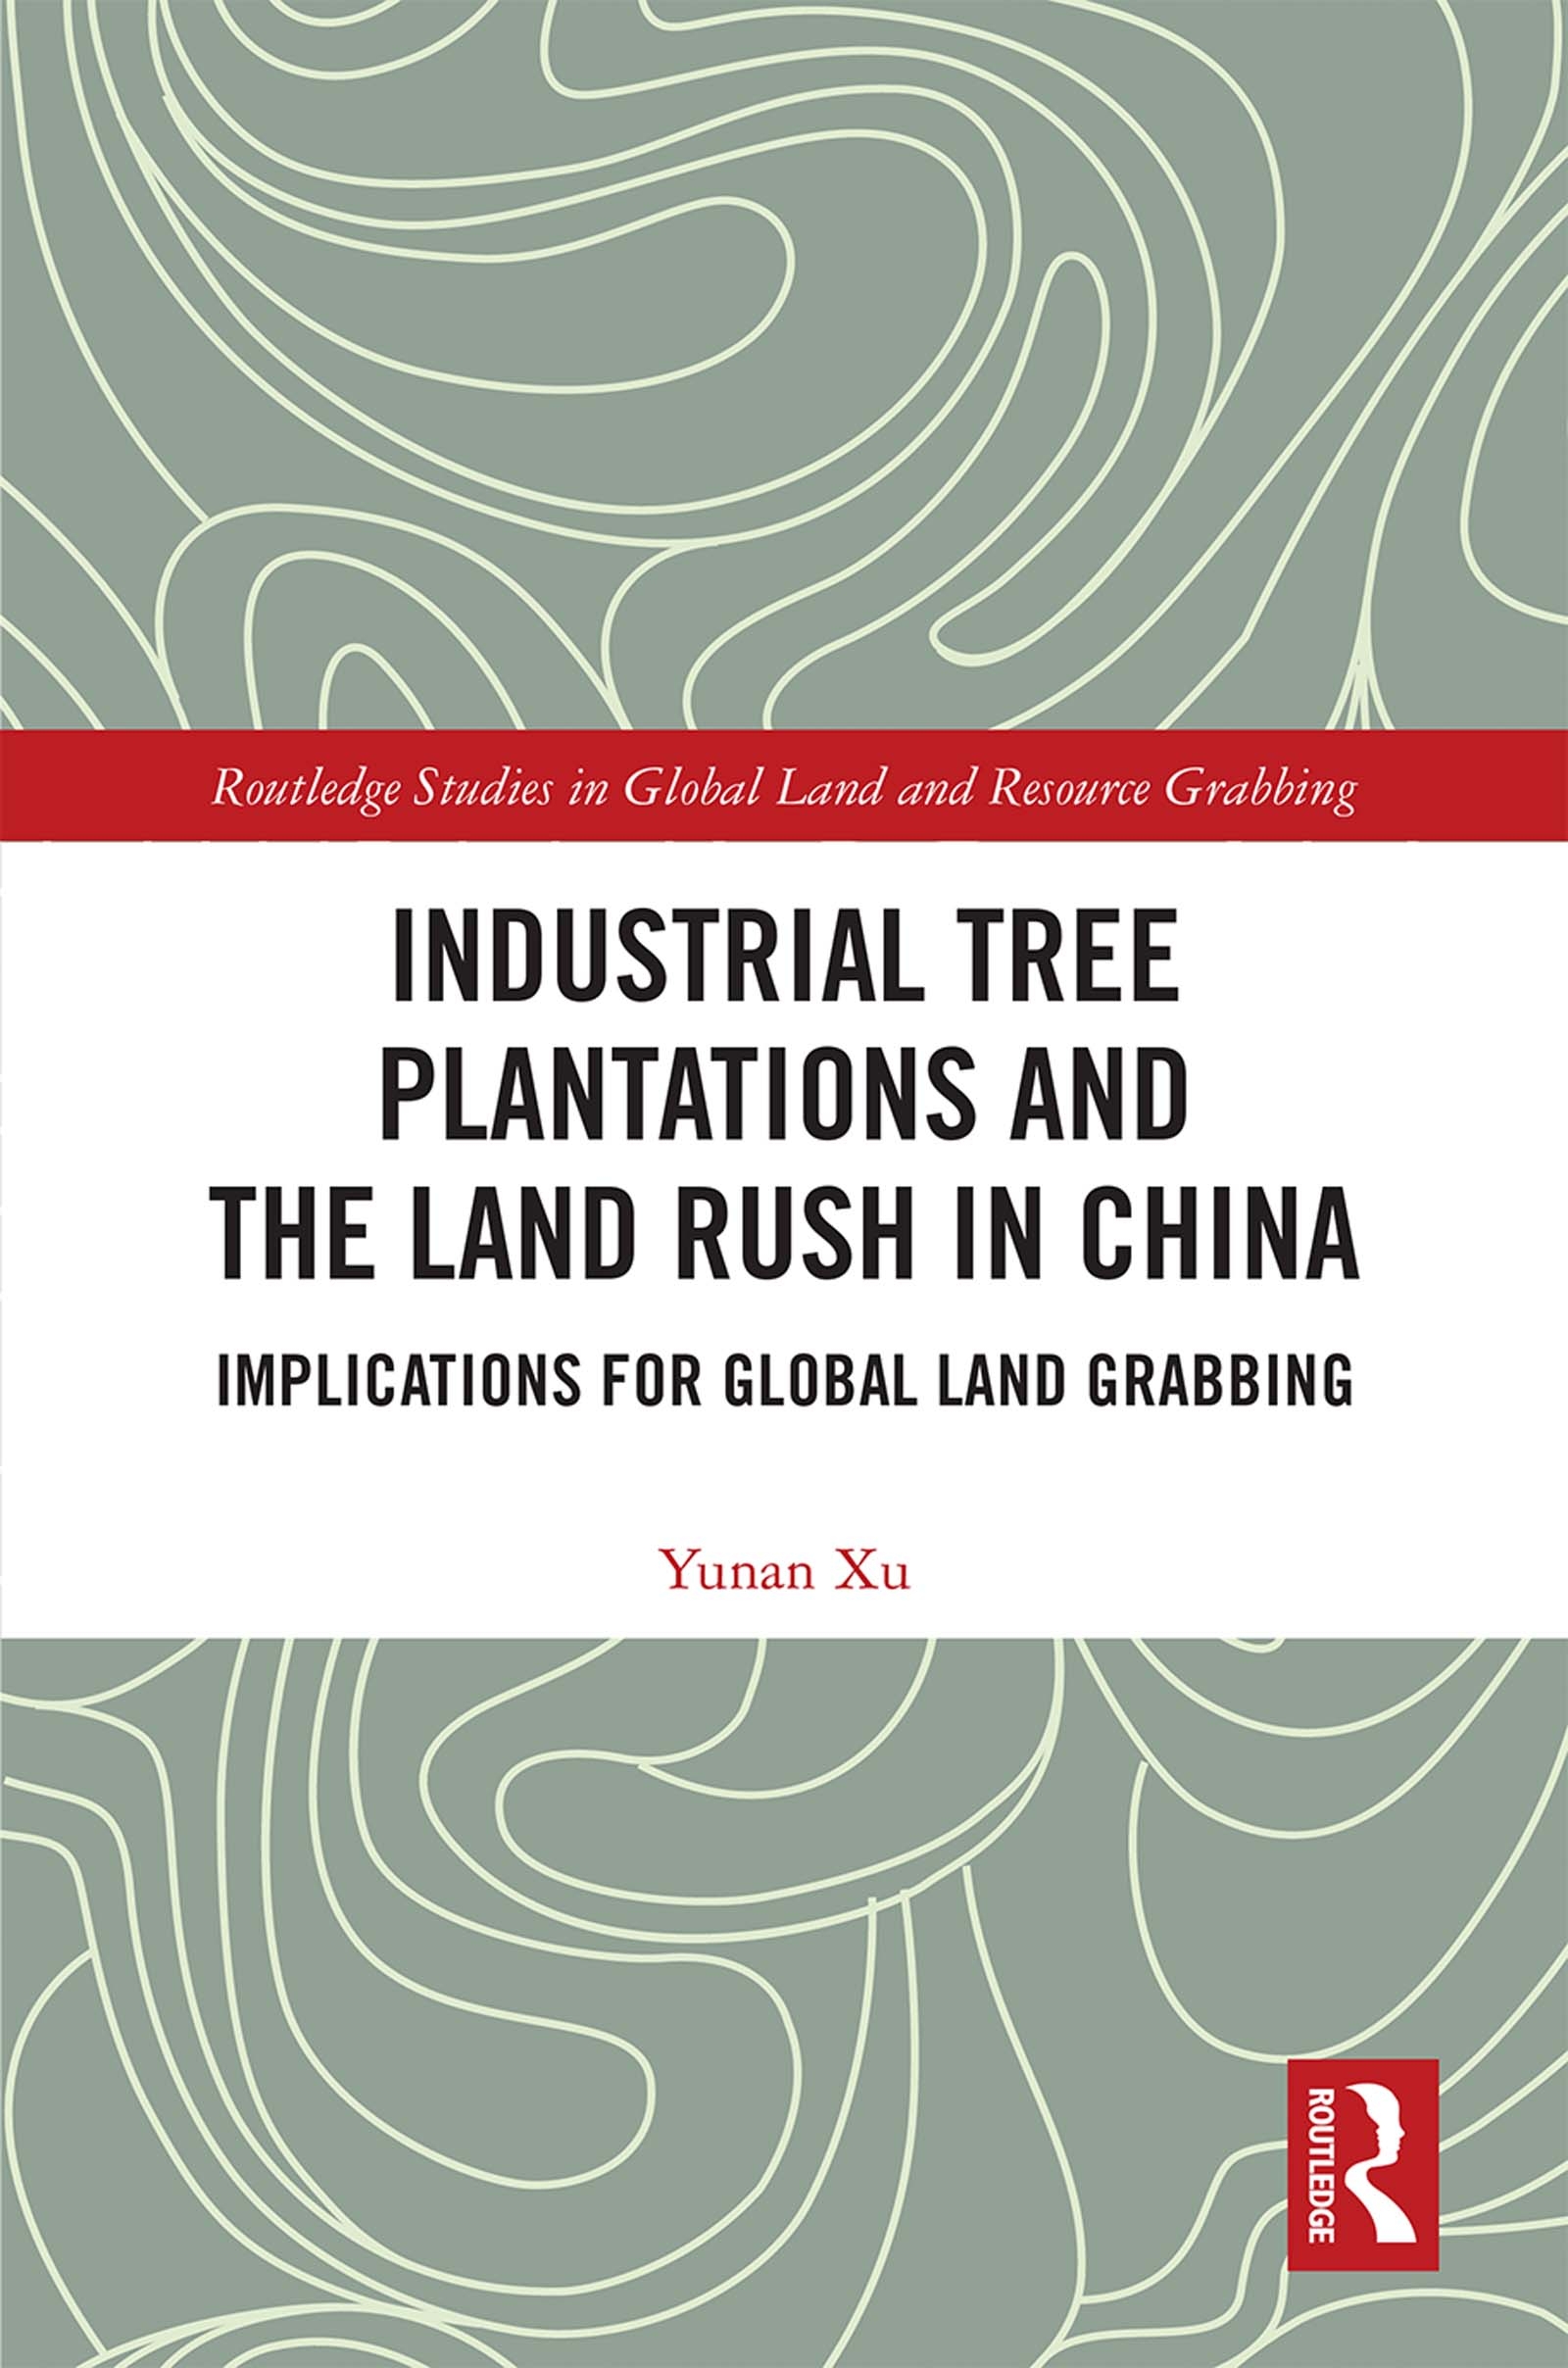 Industrial Tree Plantations and the Land Rush in China: Implications for Global Land Grabbing